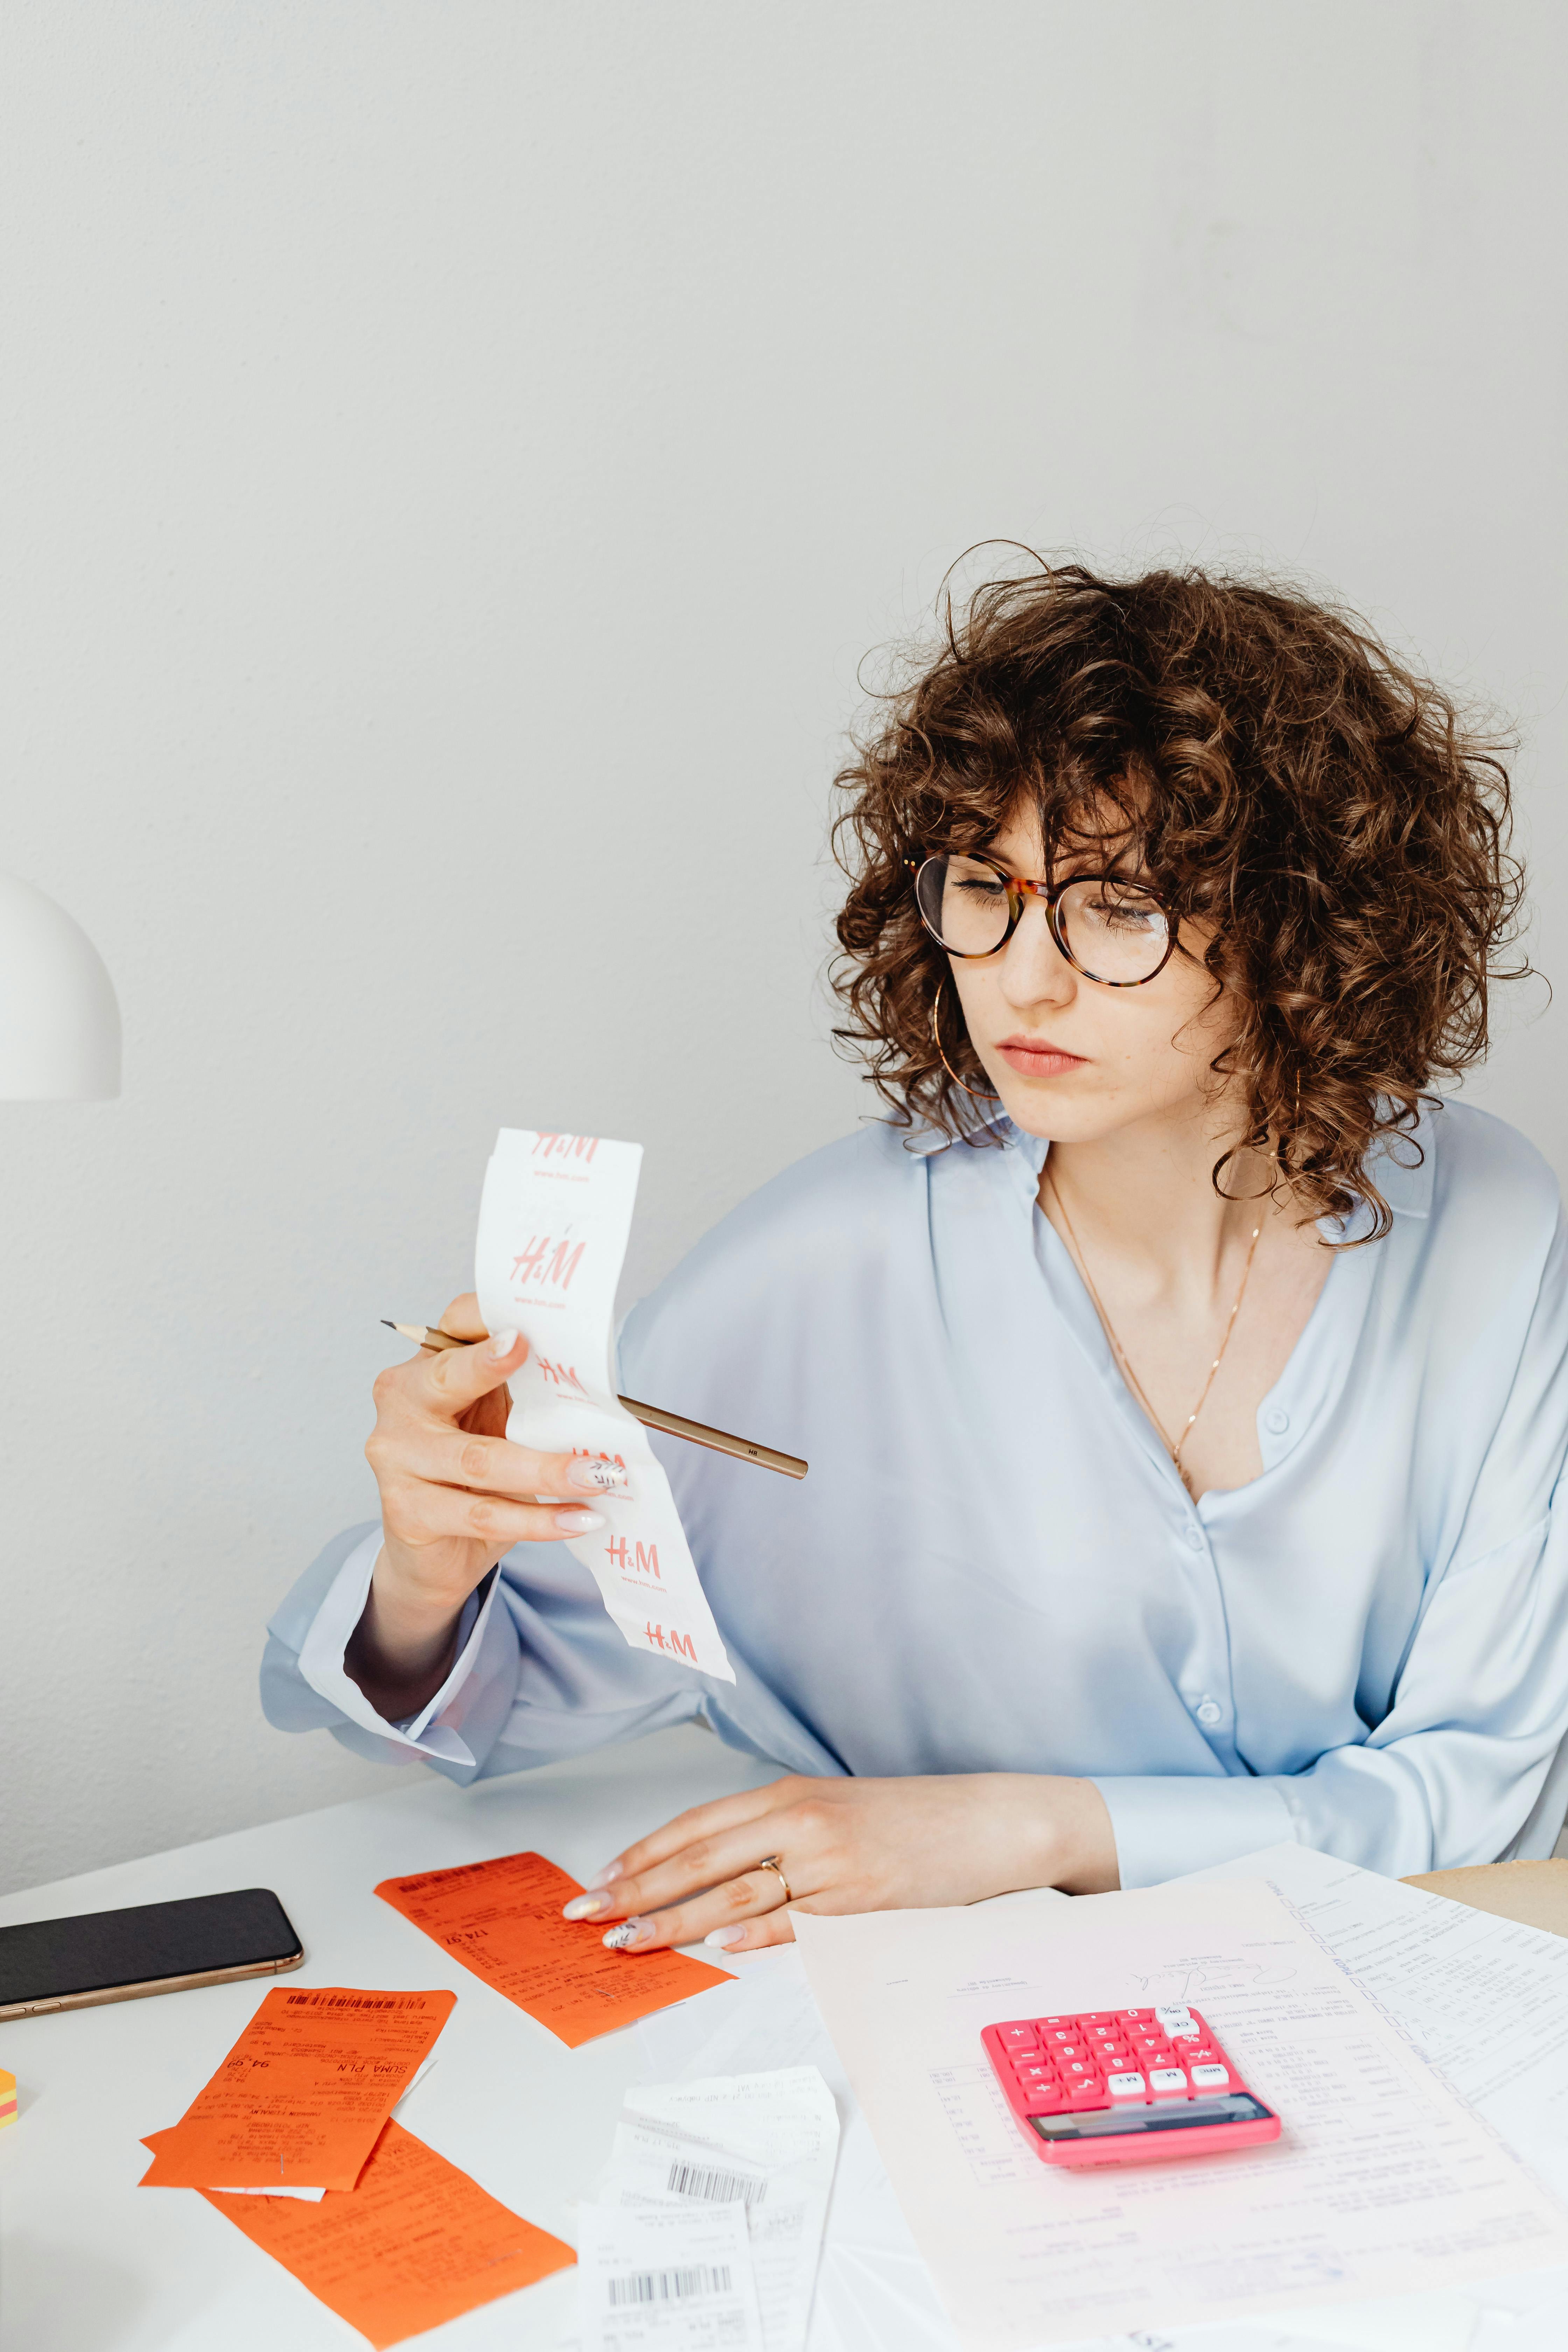 A concerned woman looking over receipts | Source: Pexels